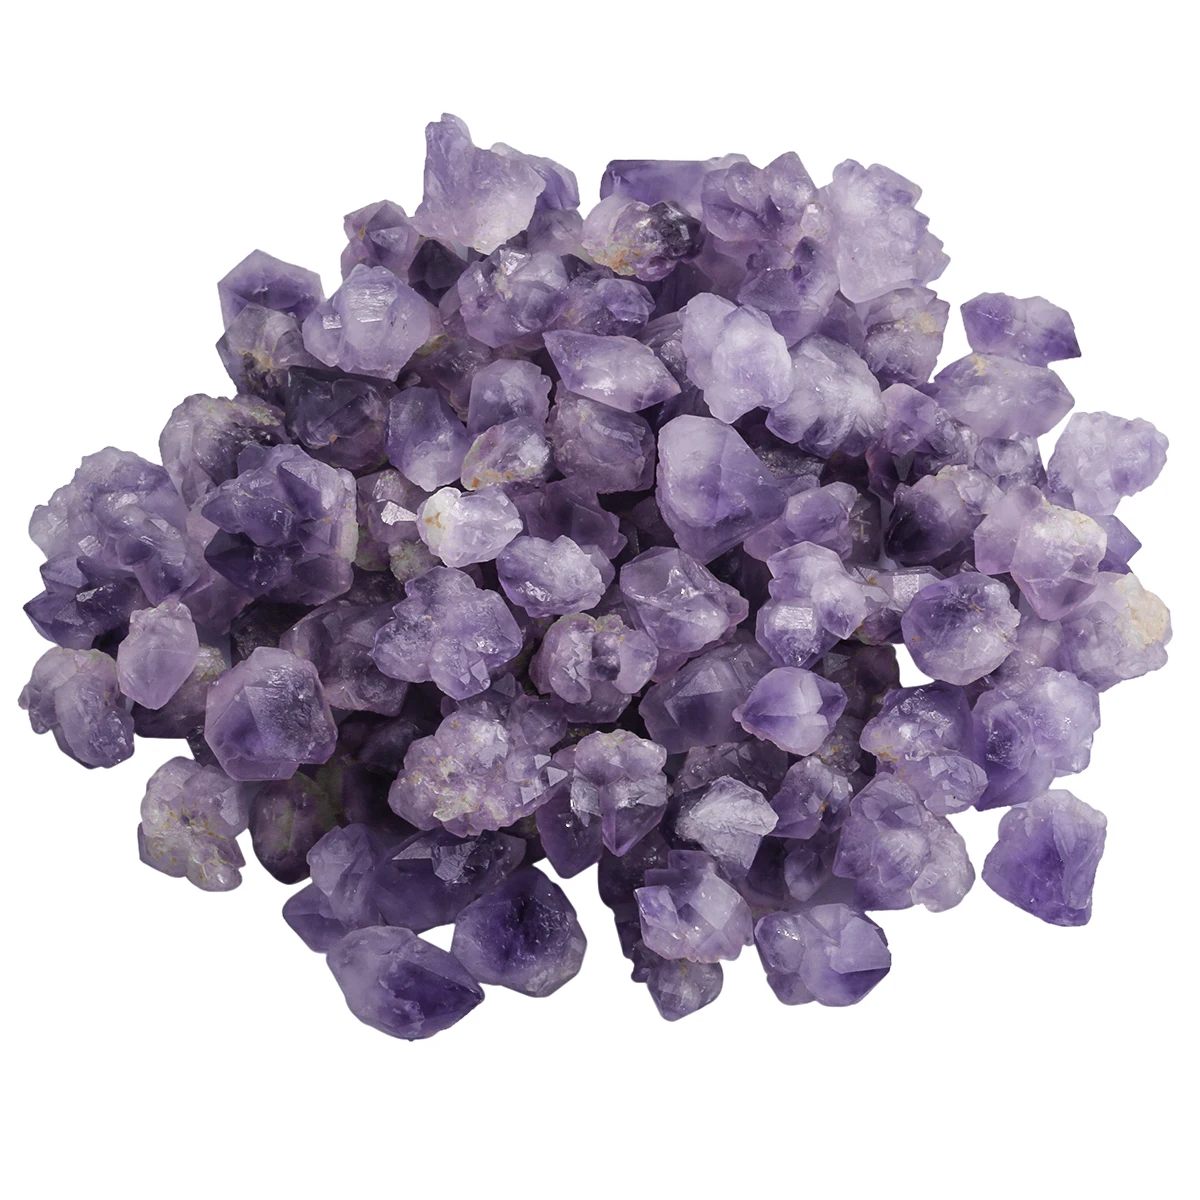 

1lb Natural Amethyst Rough Crystal Stone For Jewelry Making Reiki Healing Wicca Stone (About 60-80 Pcs) Fish Tank Decor